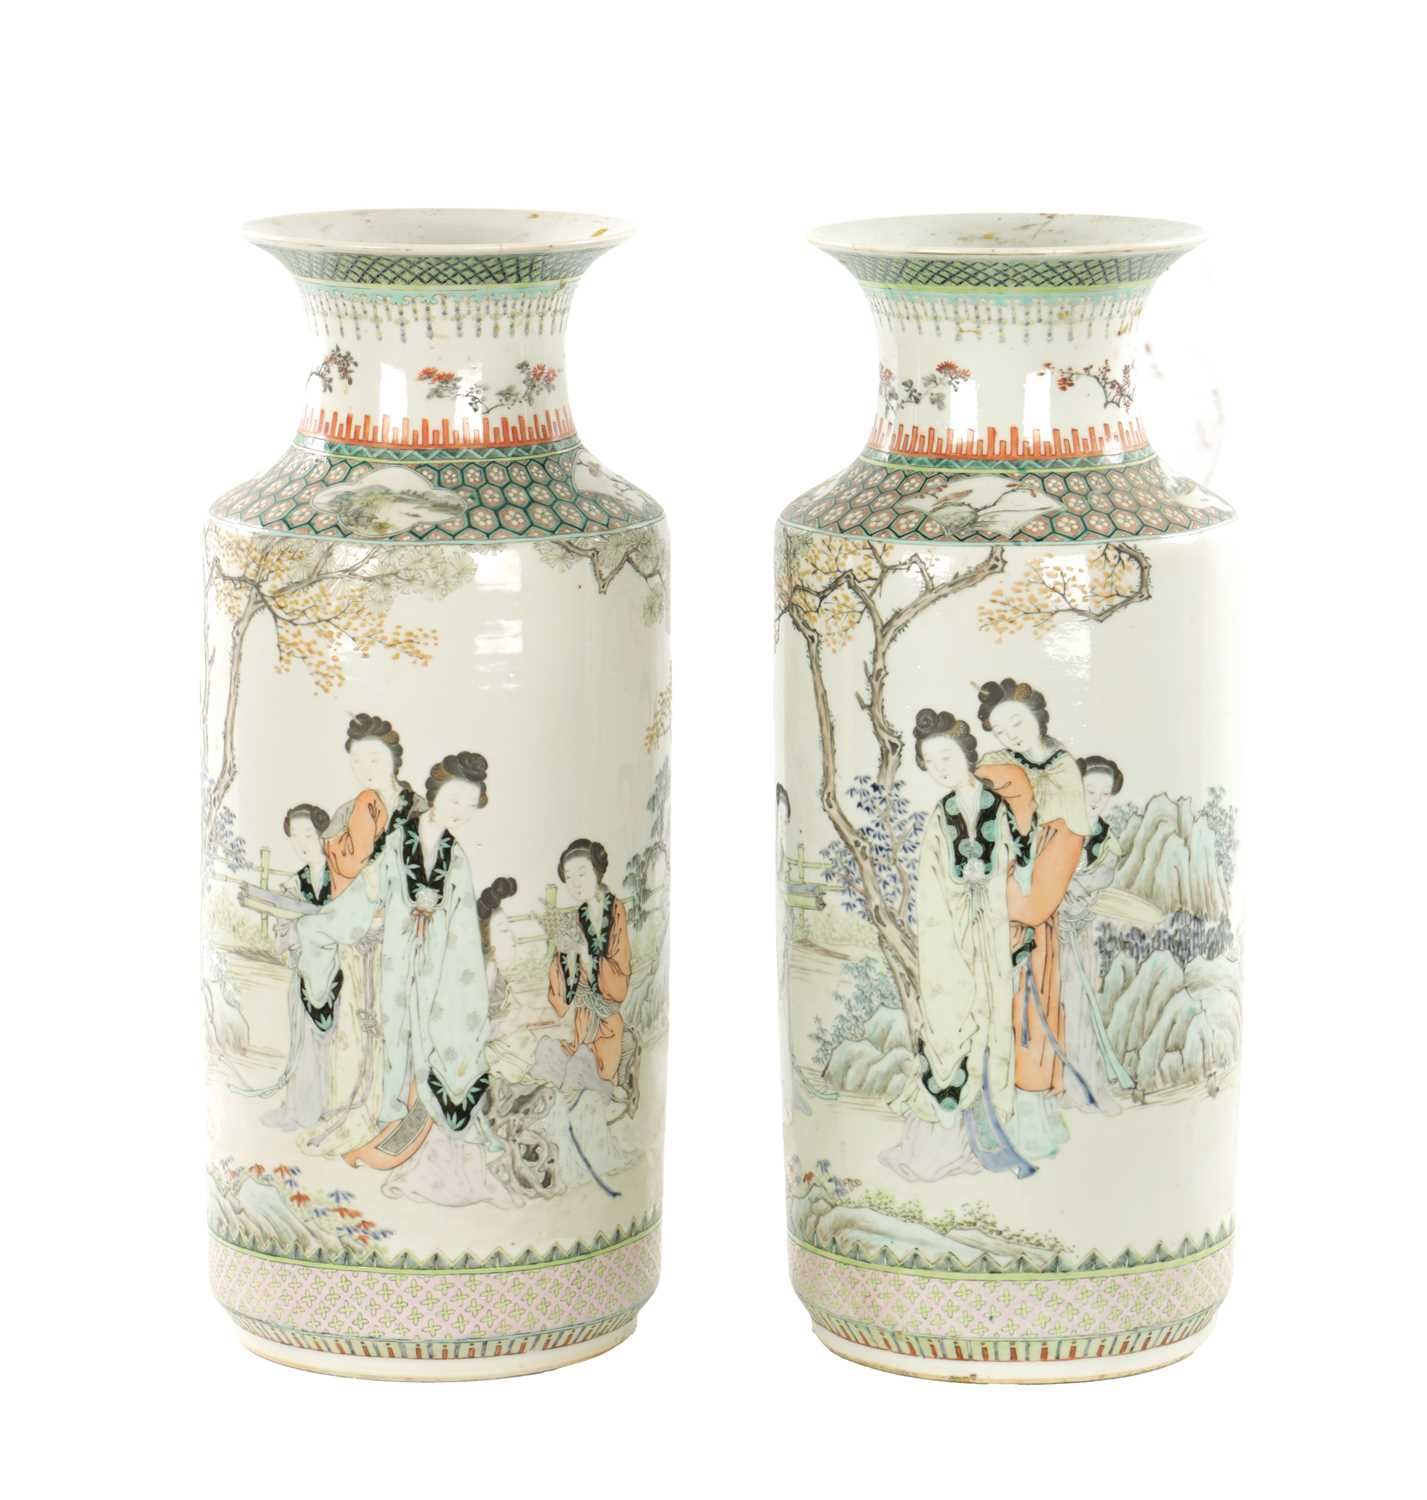 A PAIR OF CHINESE REPUBLIC FAMILLE VERTE CYLINDRICAL VASES